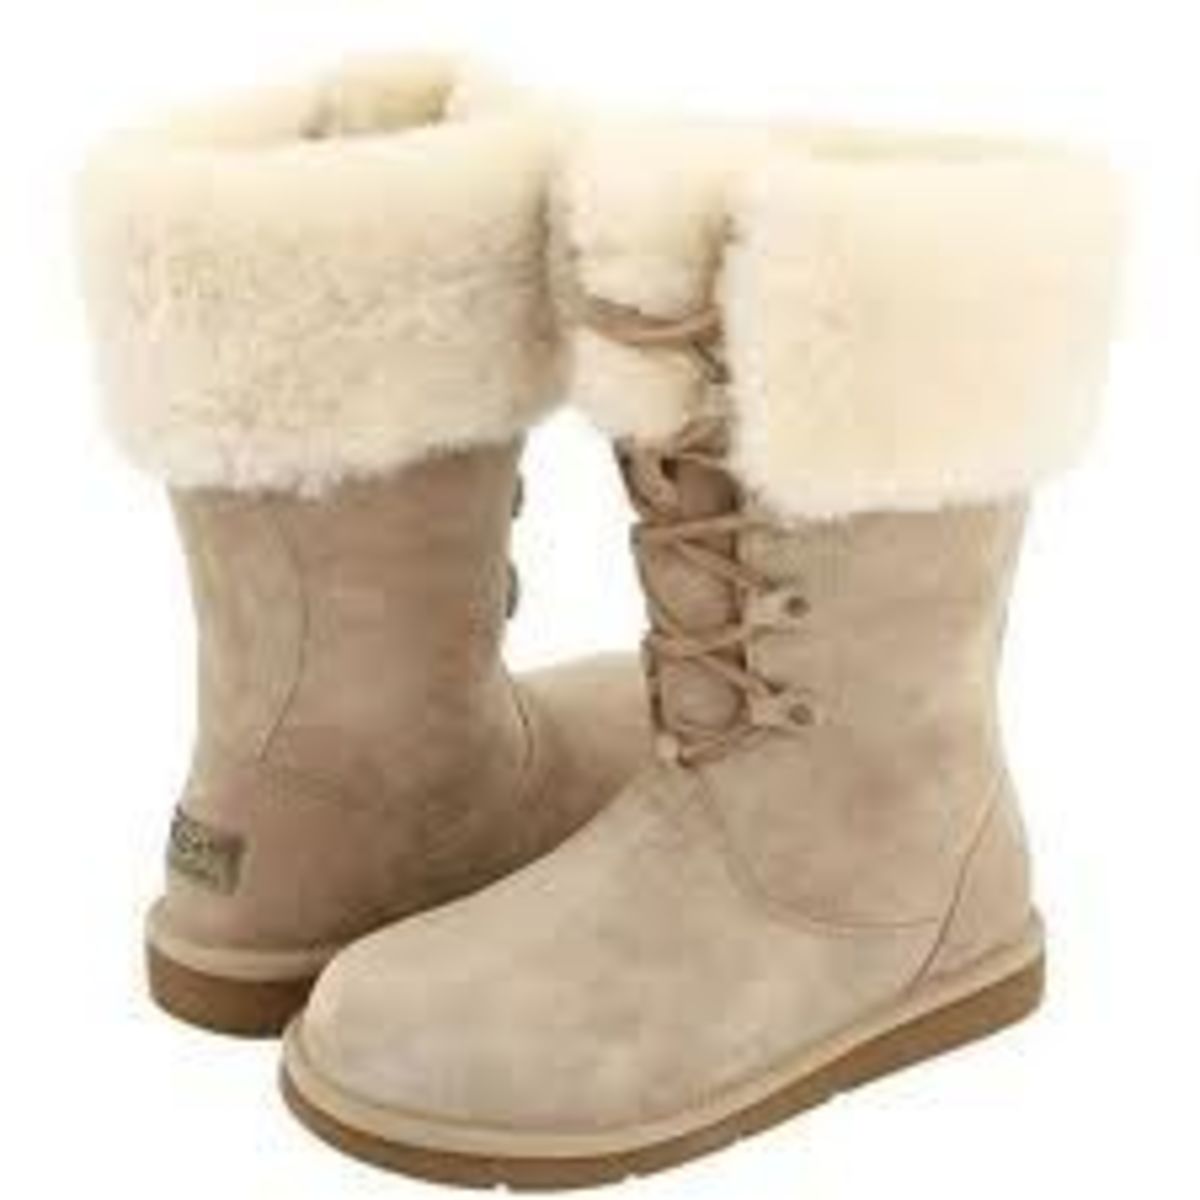 how to clean uggs boots without ruining them